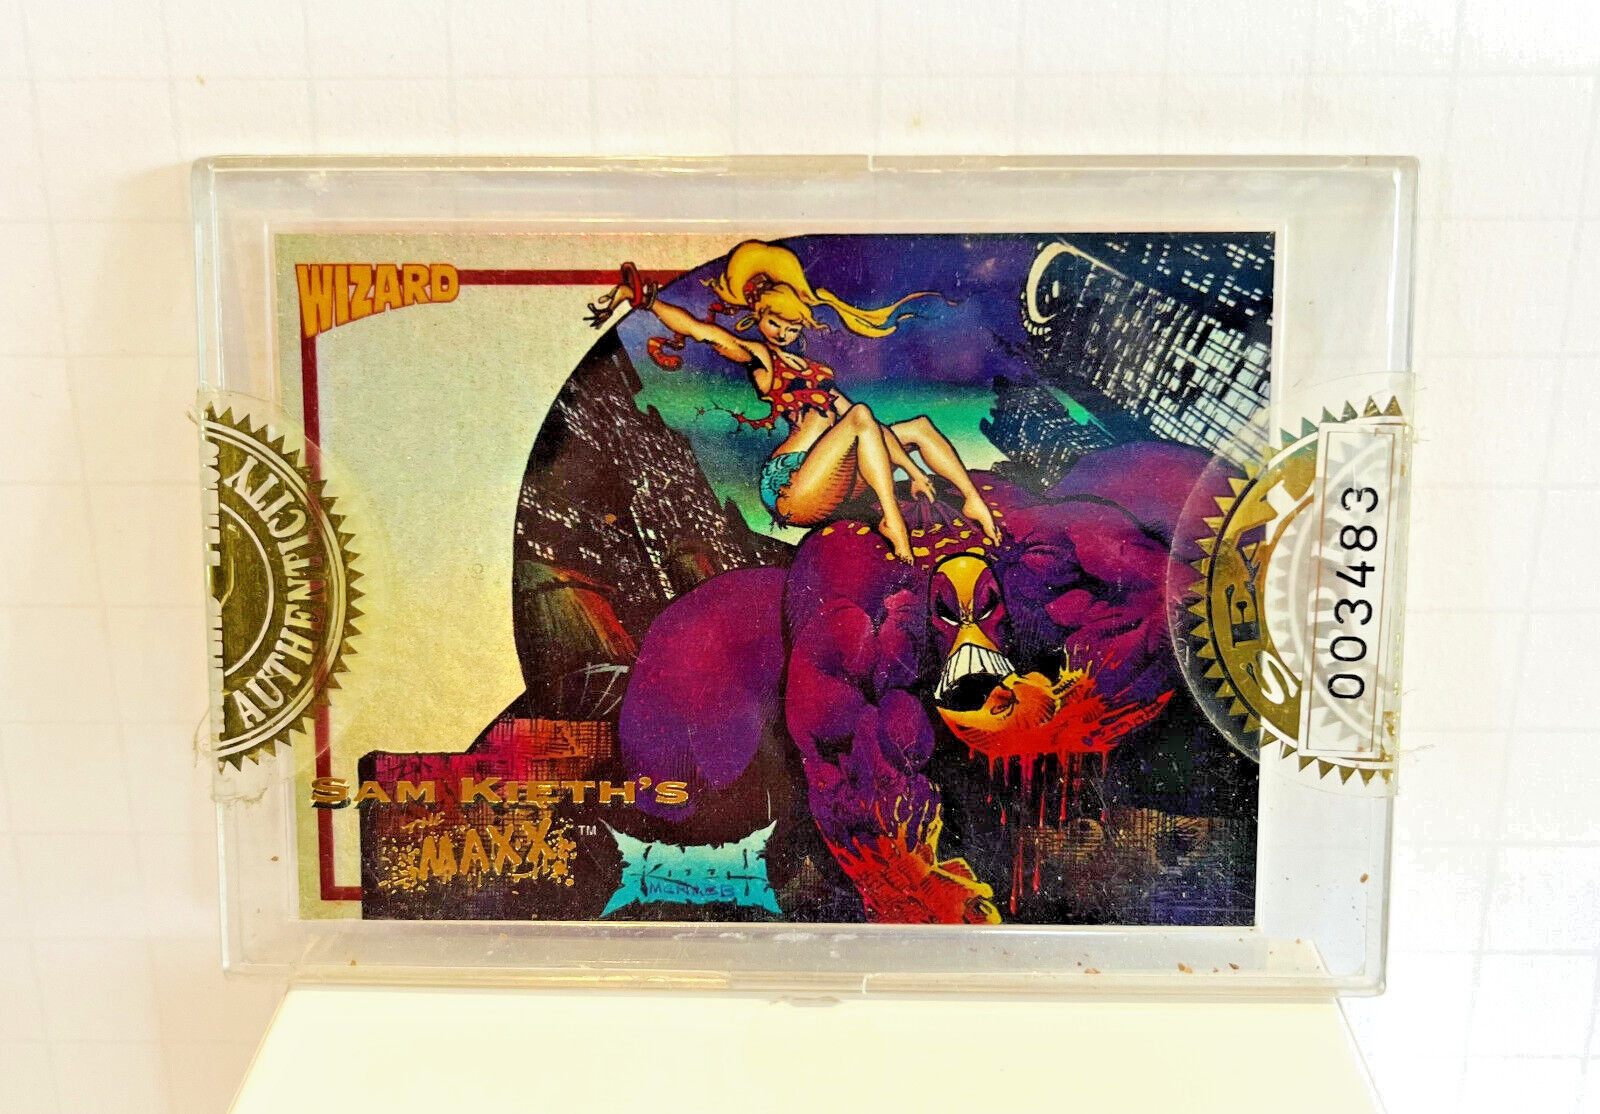 Wizard Magazine 1993 GOLD STAMPED SAM KEITH'S THE MAXX PROMO Sealed Card #2